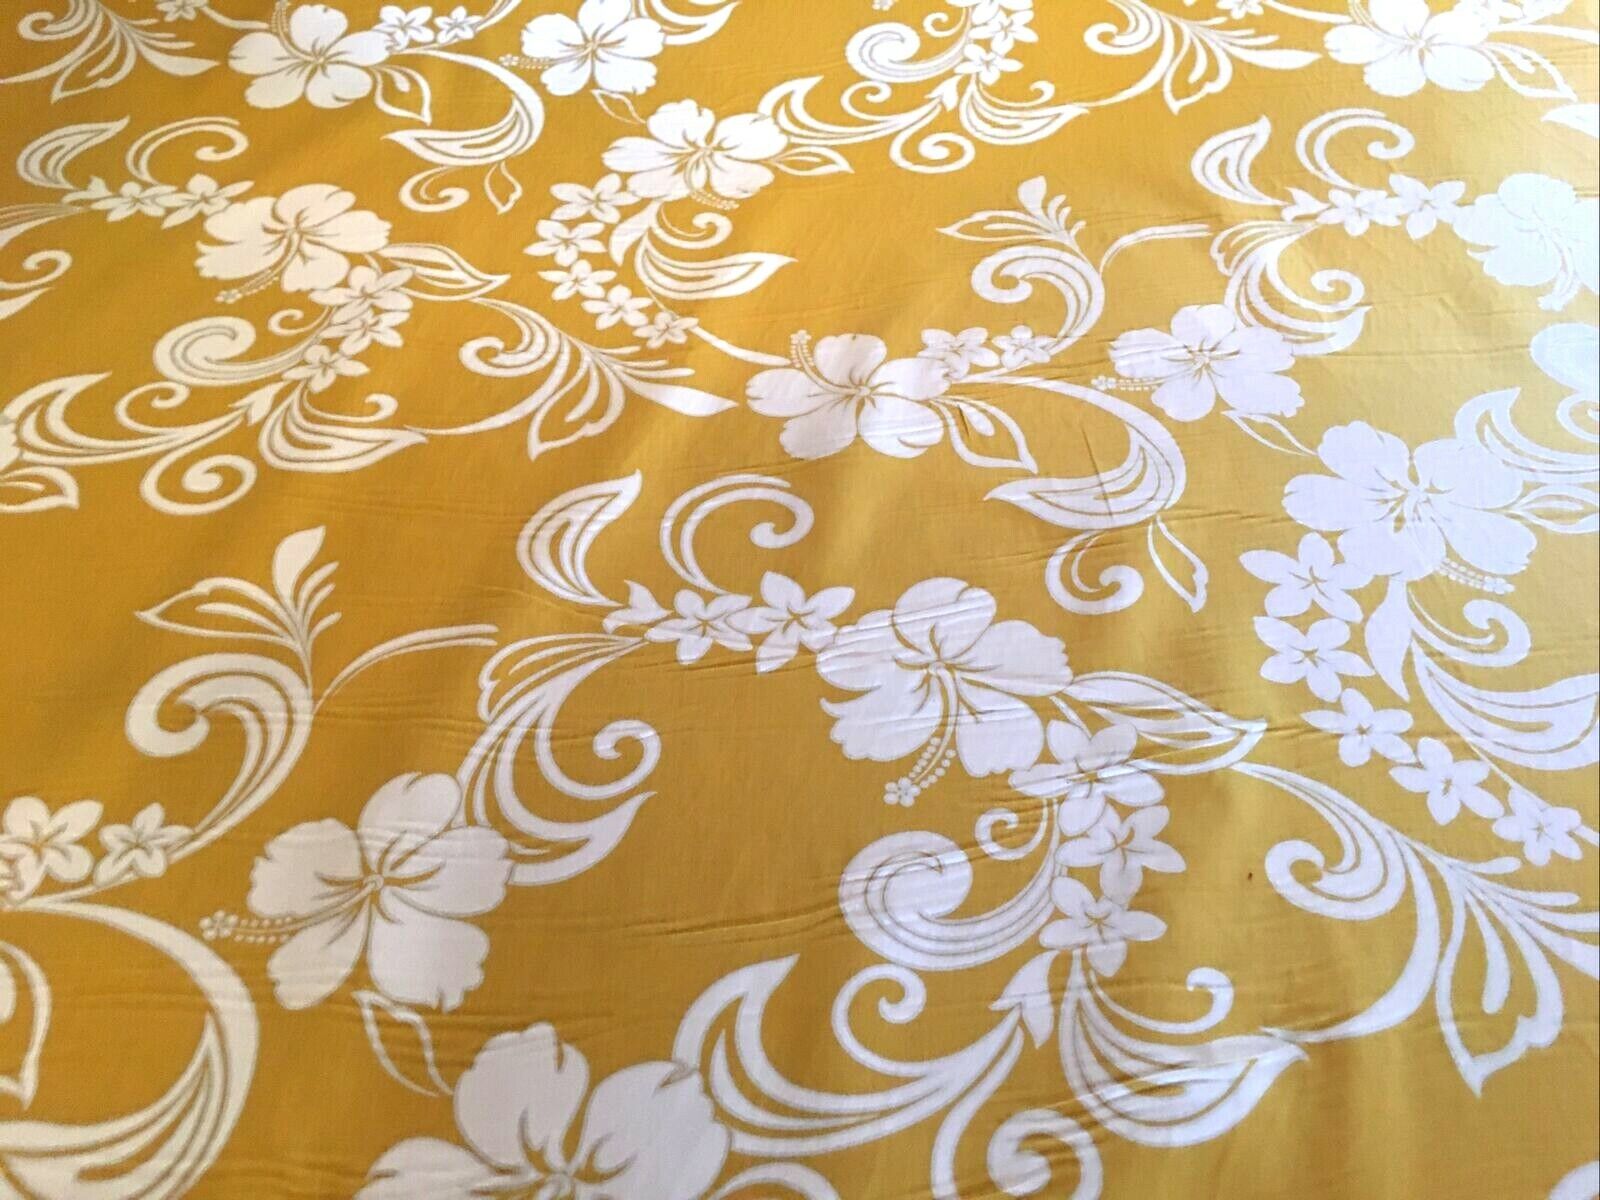 Hawaiian Hibiscus Flower Fabric yellow 100% Cotton By The Yard W/ great value